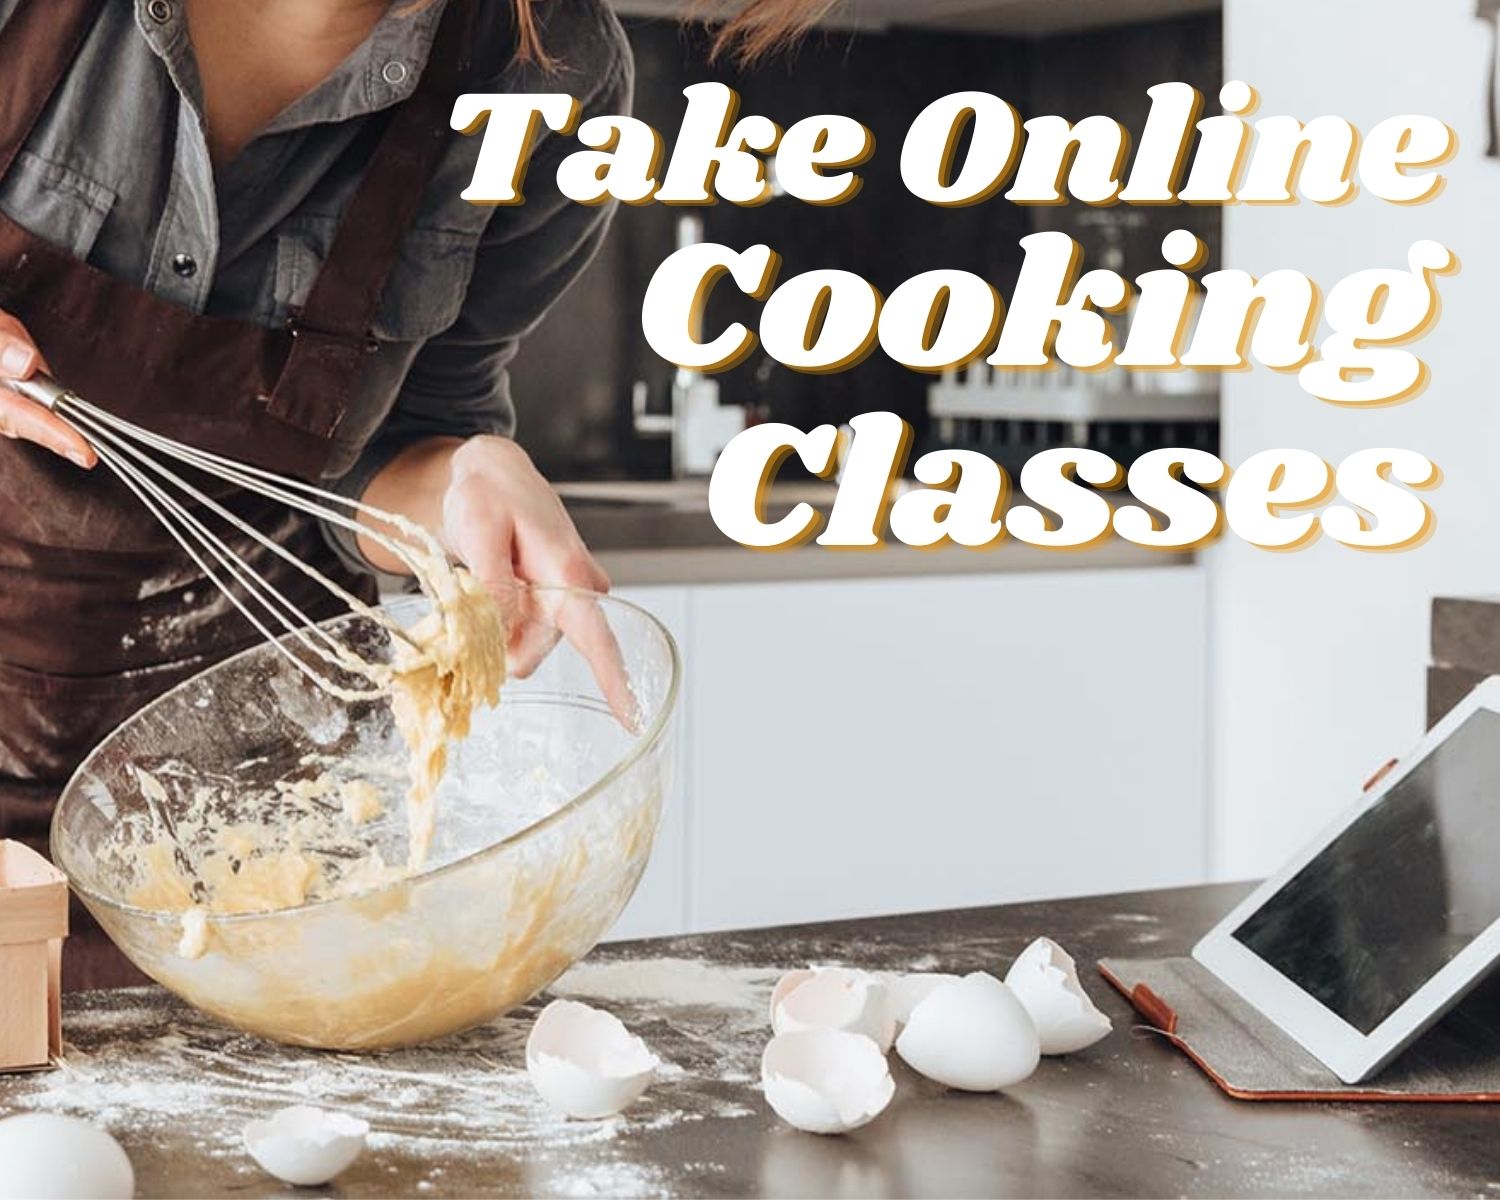 In Lockdown Here’s Five New Things to Try Online Cooking Class